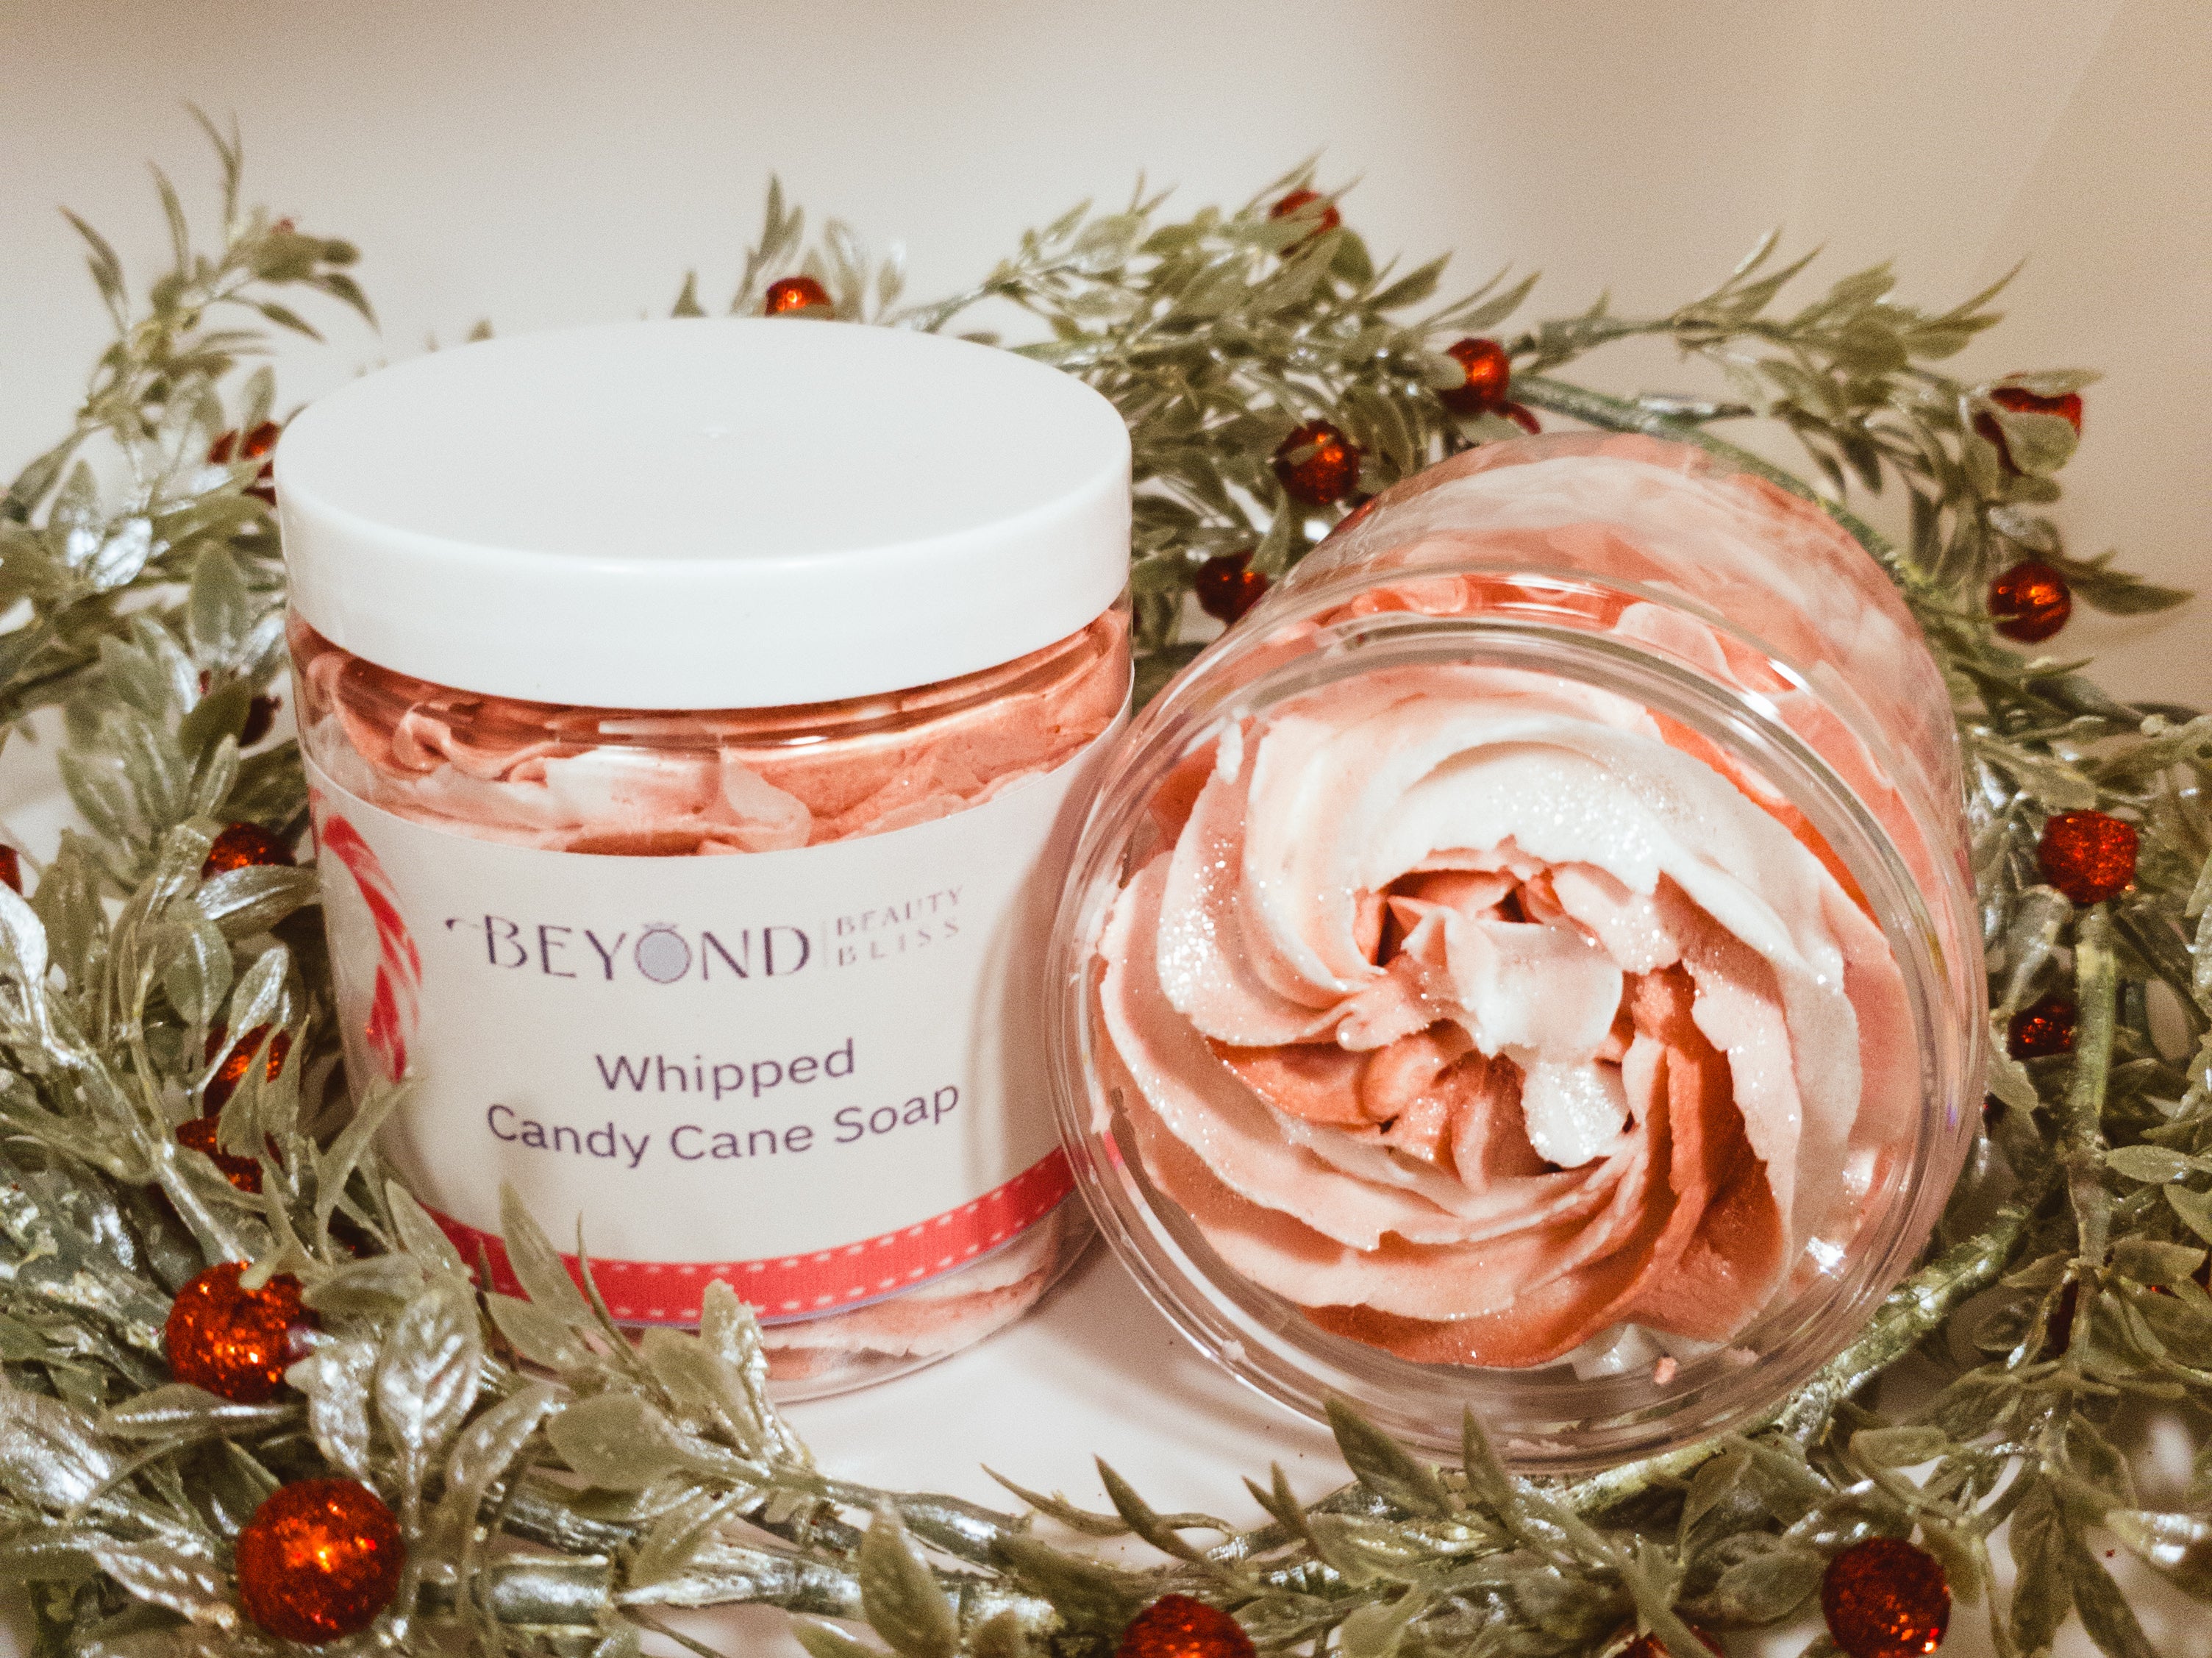 Whipped Candy Cane Soap - Beyond Beauty Bliss